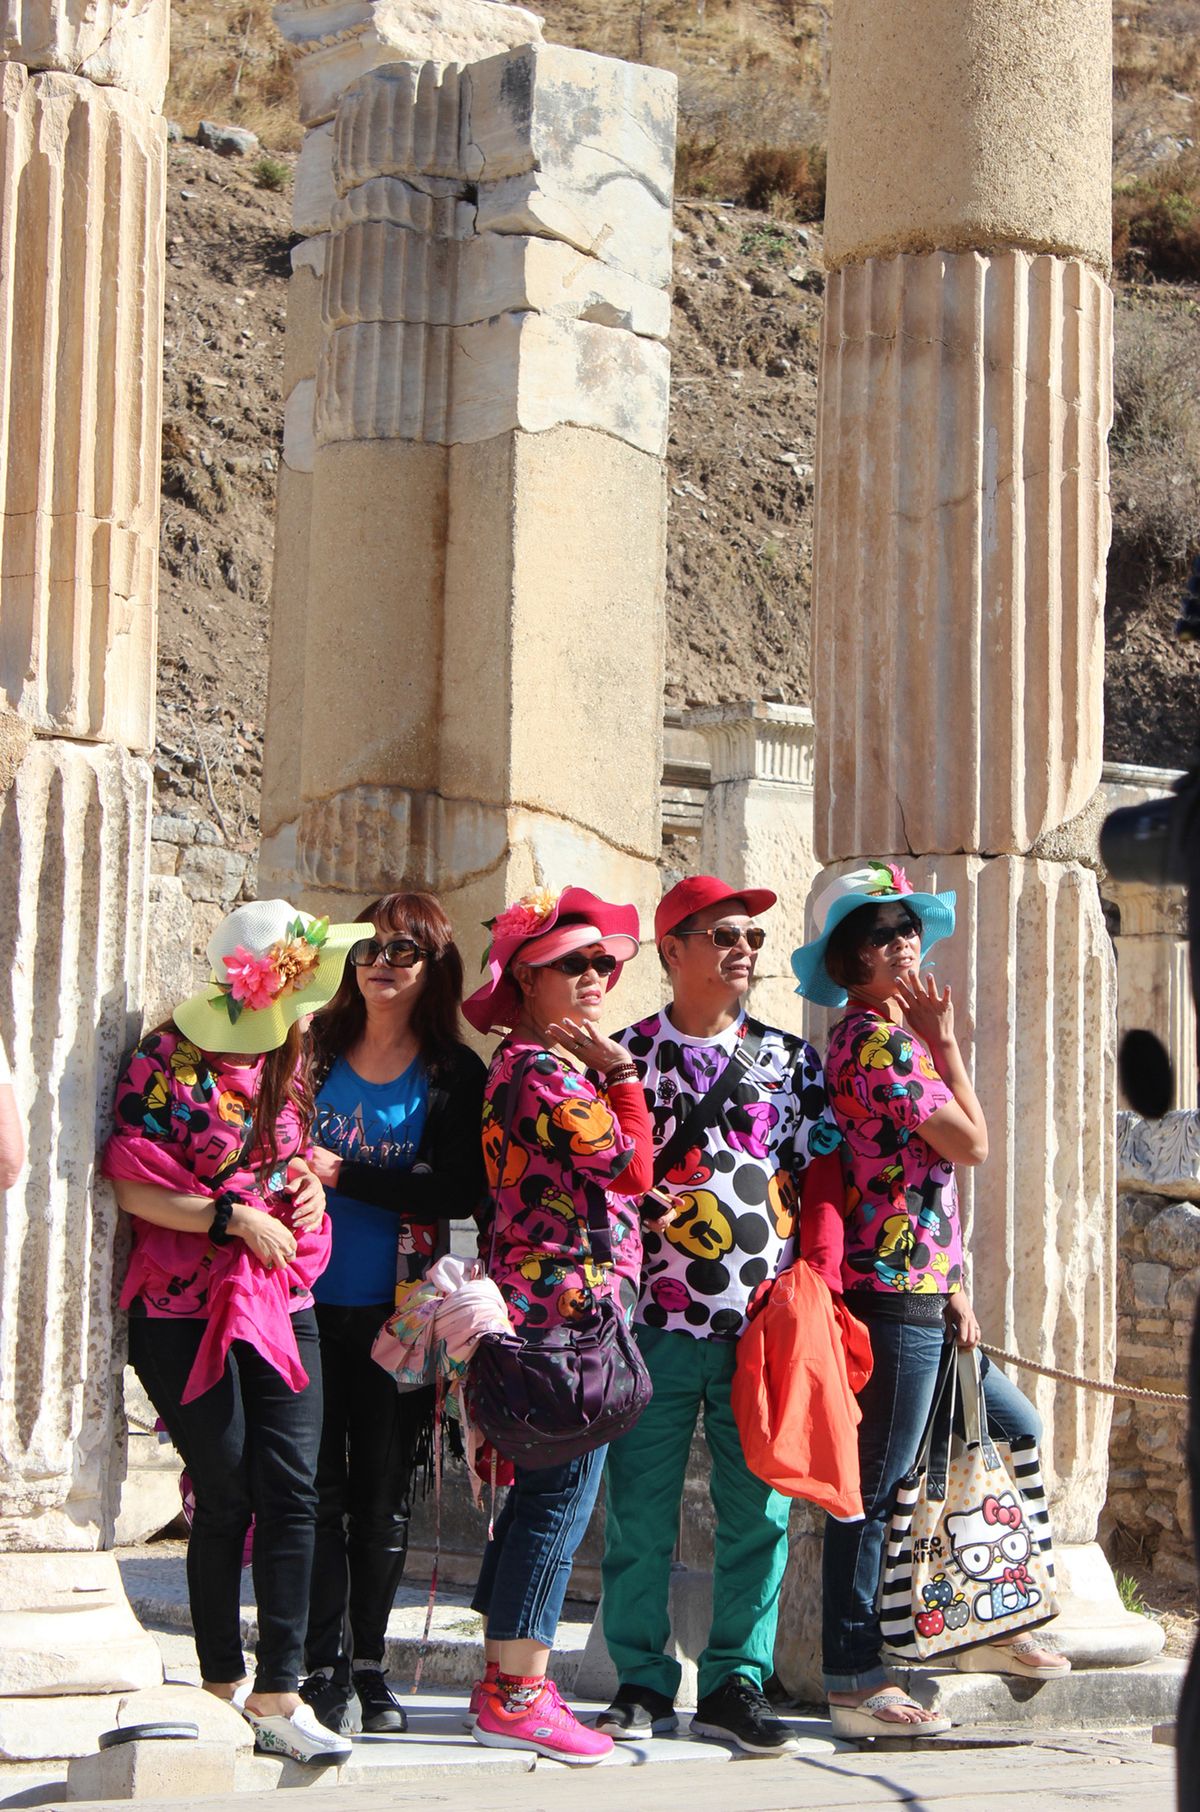 Above: Tourists from all over the world pose for pictures among the ruins in Ephesus, Turkey